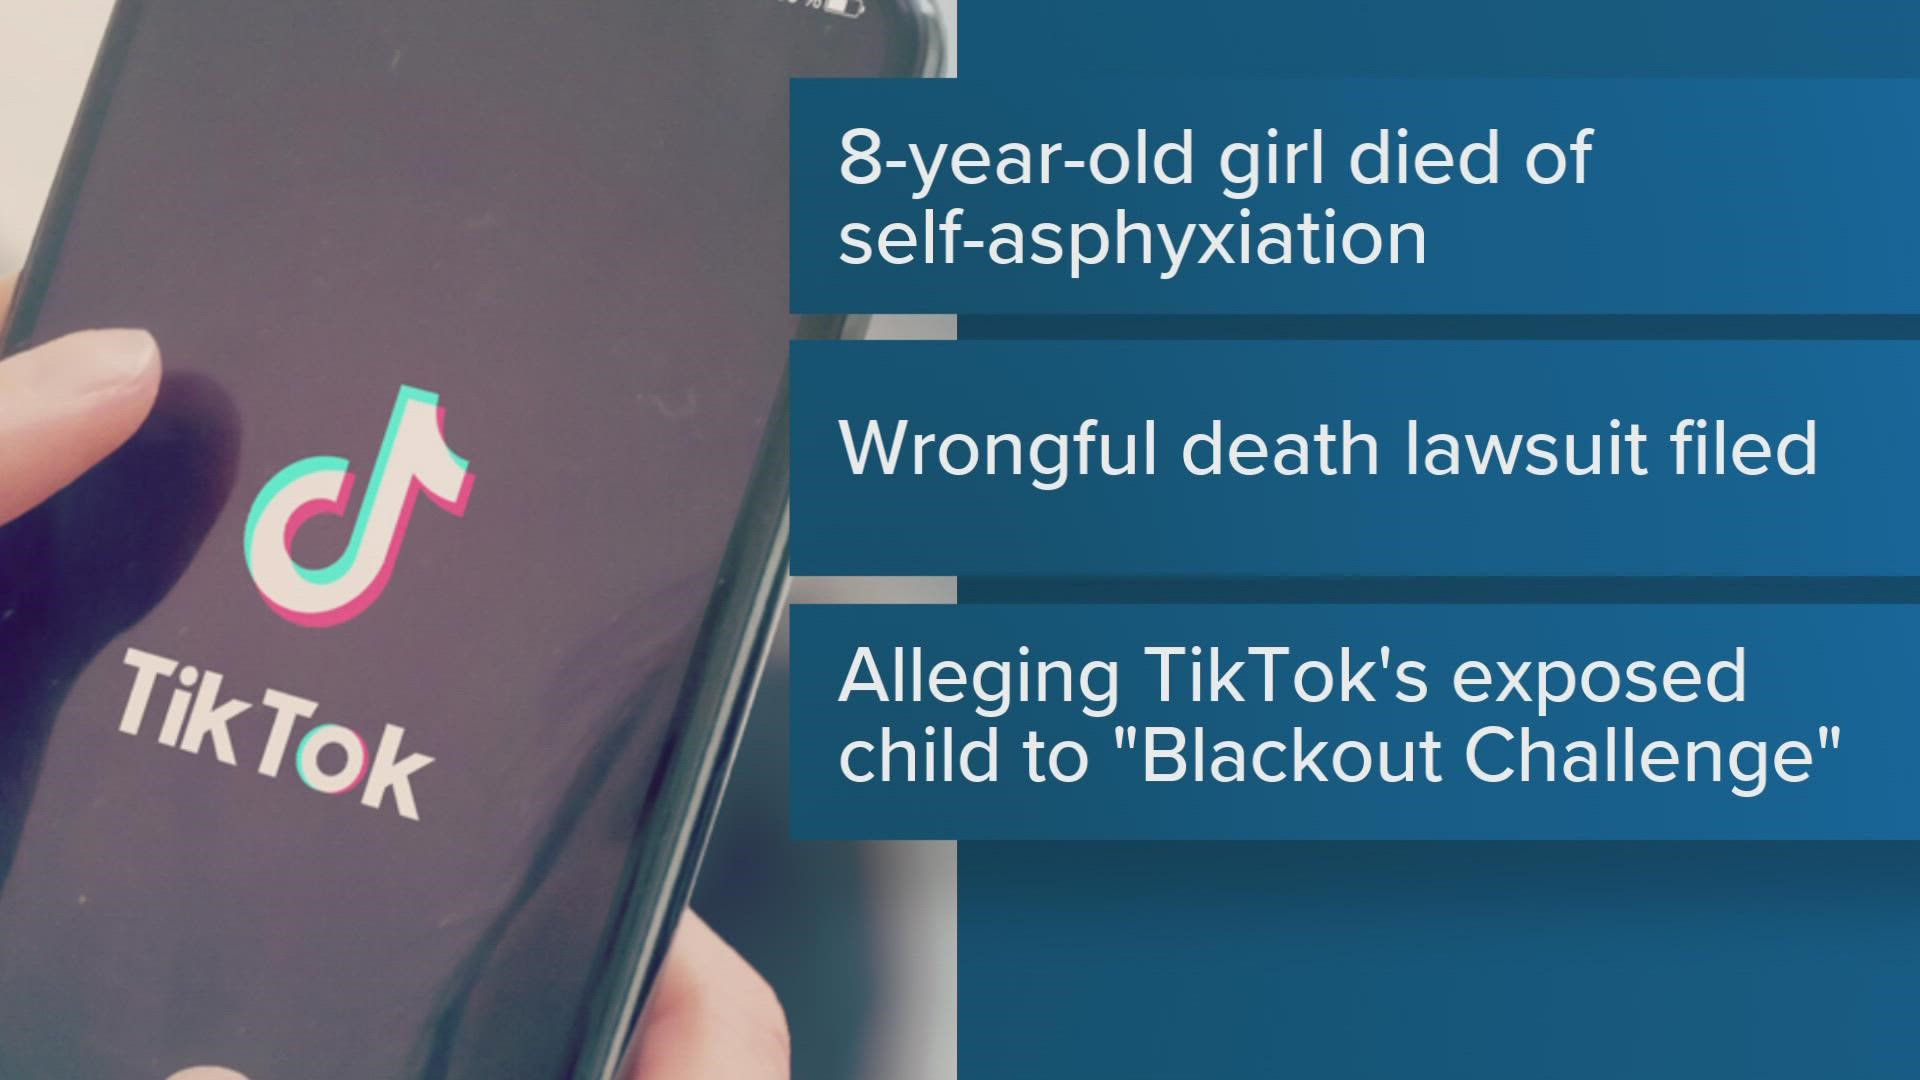 “TikTok needs to be held accountable for pushing deadly content to these... young girls,” said attorney Matthew P. Bergman in a news release.